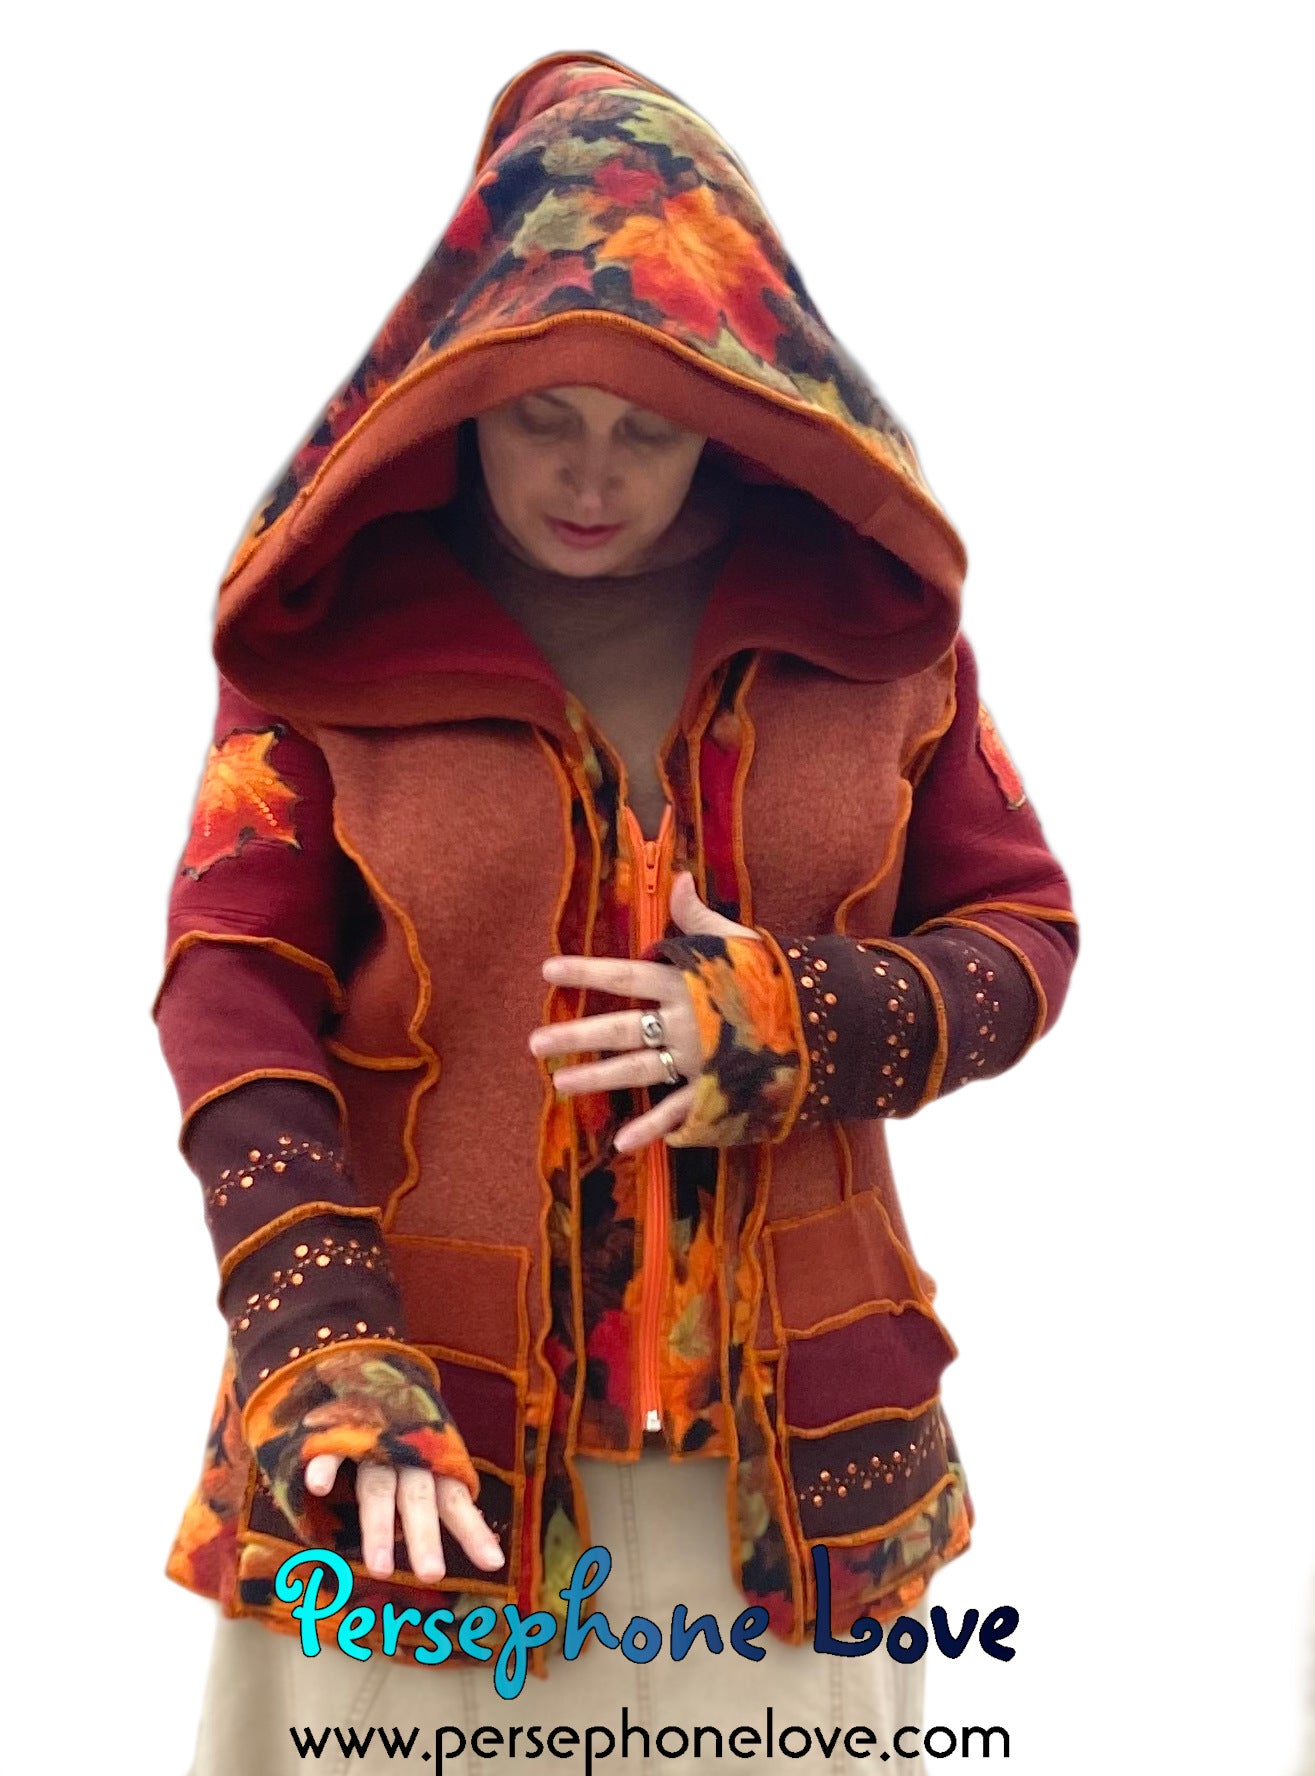 "Sparks" Katwise style embroidered/felted/sequins 100% cashmere patchwork hoodie-2547